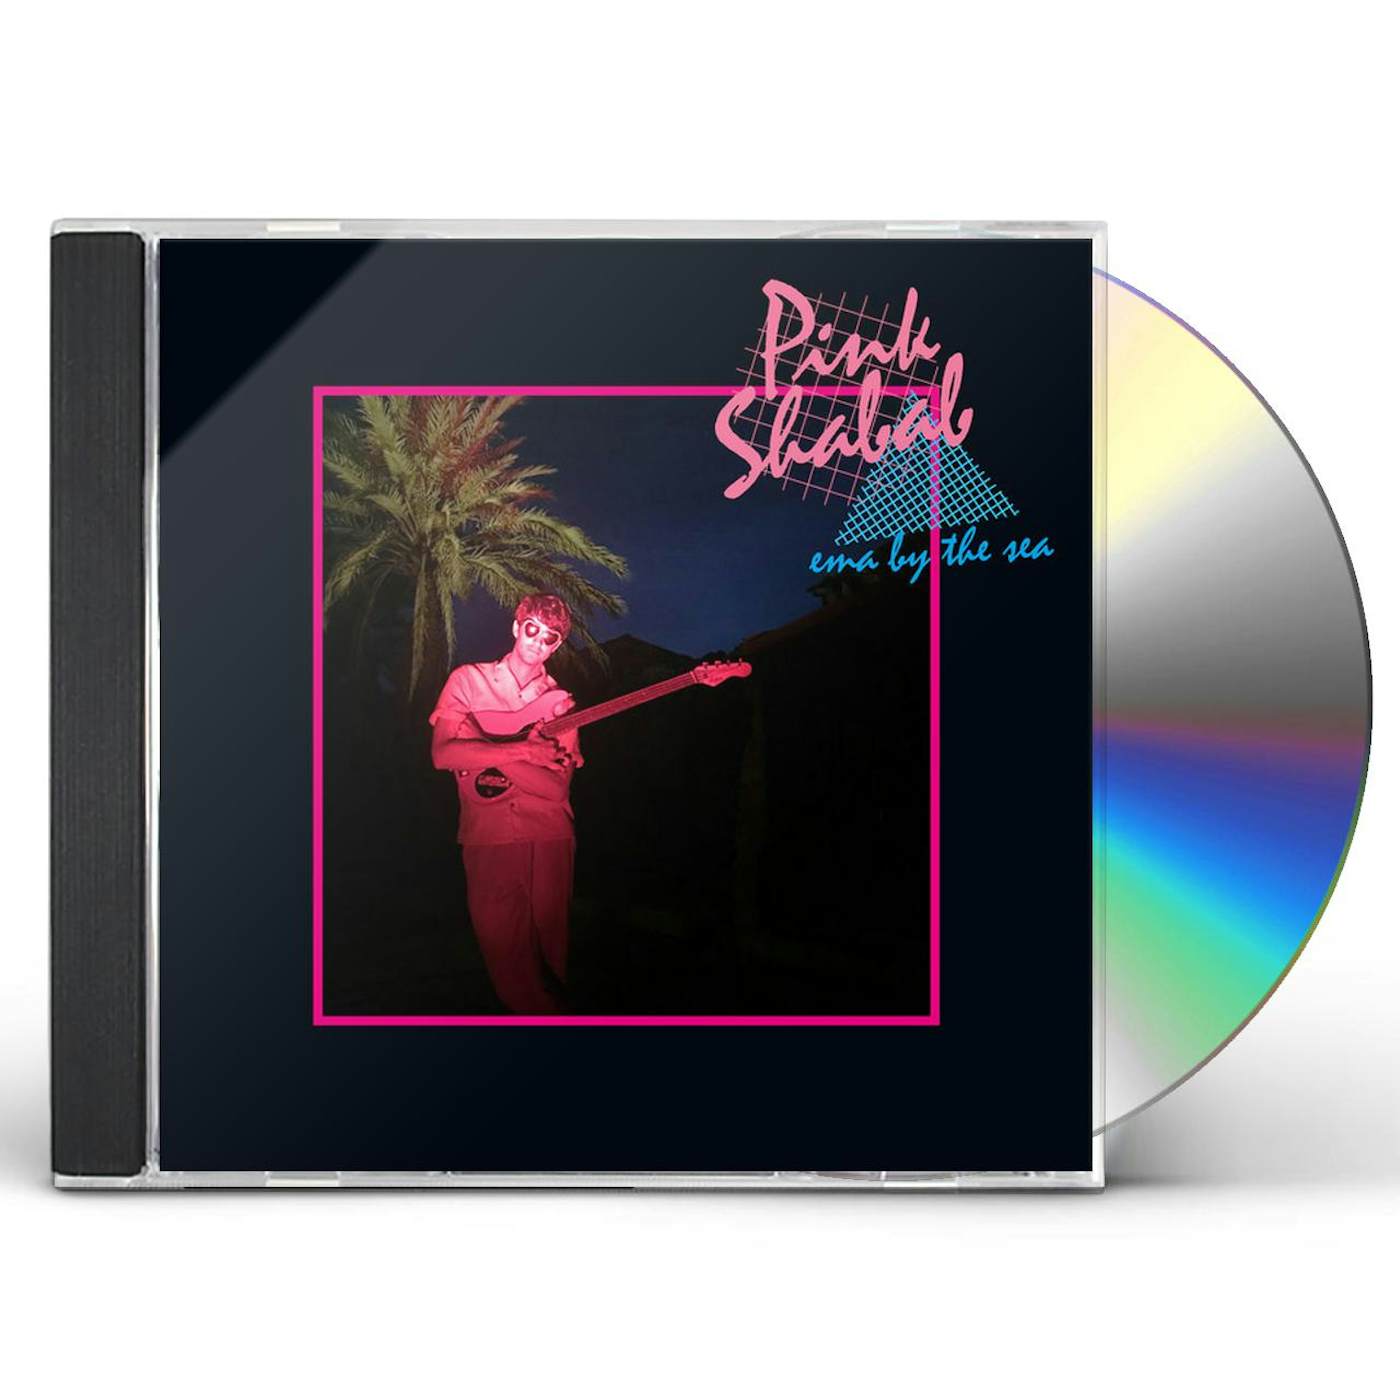 Pink Shabab EMA BY THE SEA CD